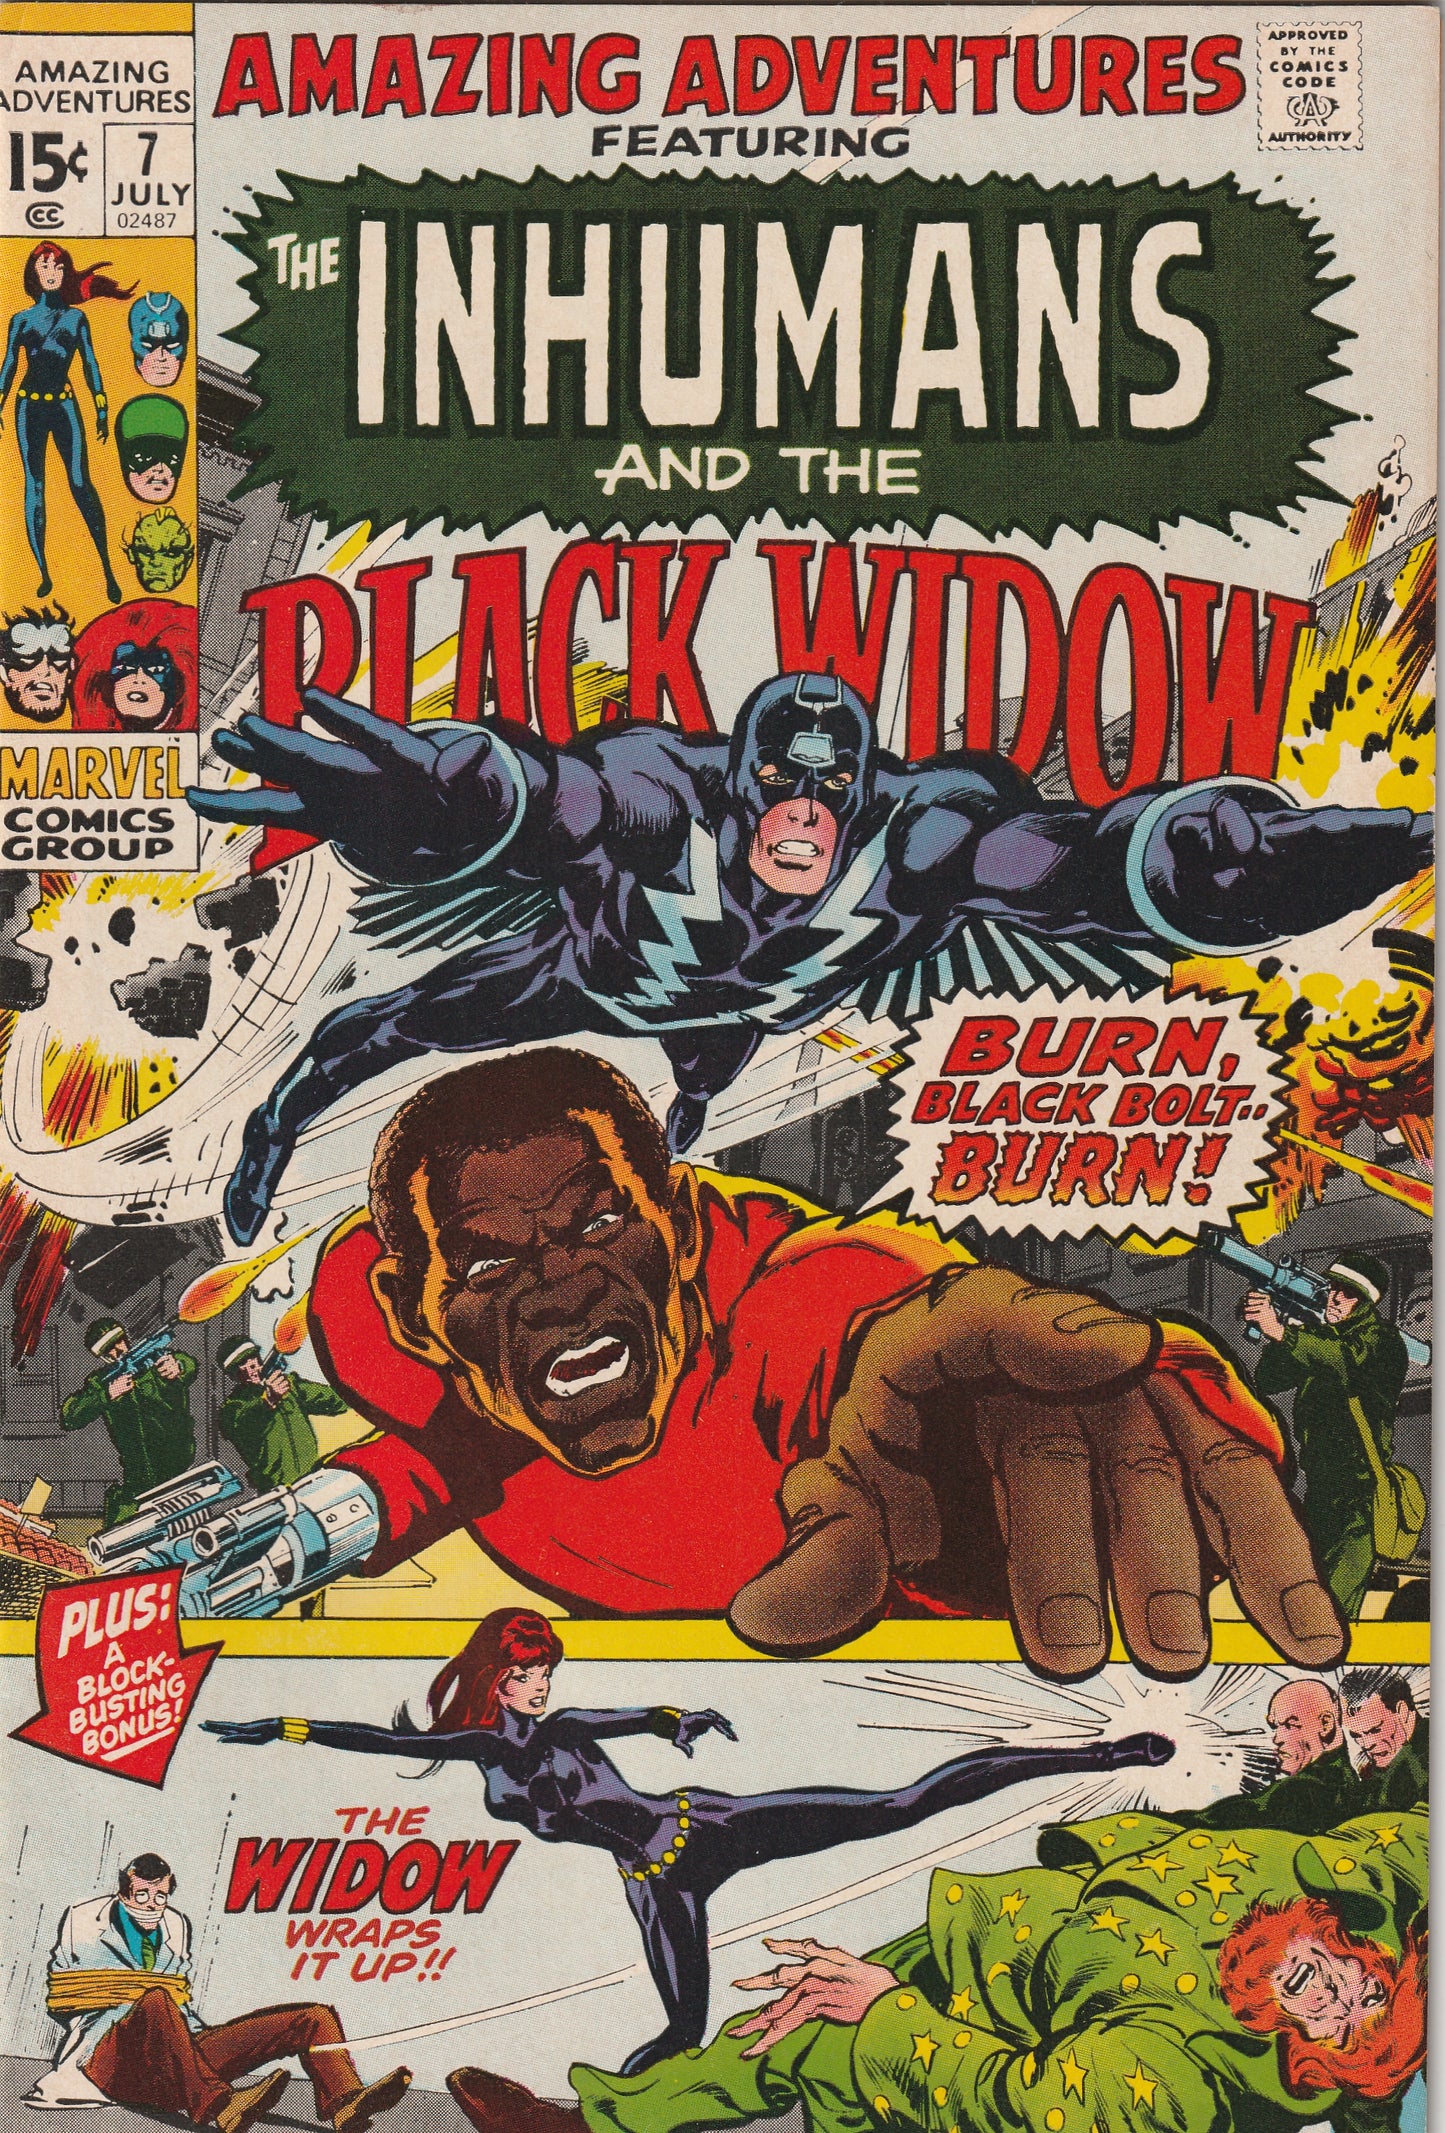 Amazing Adventures #7 (1971) - Featuring The Inhumans and Black Widow